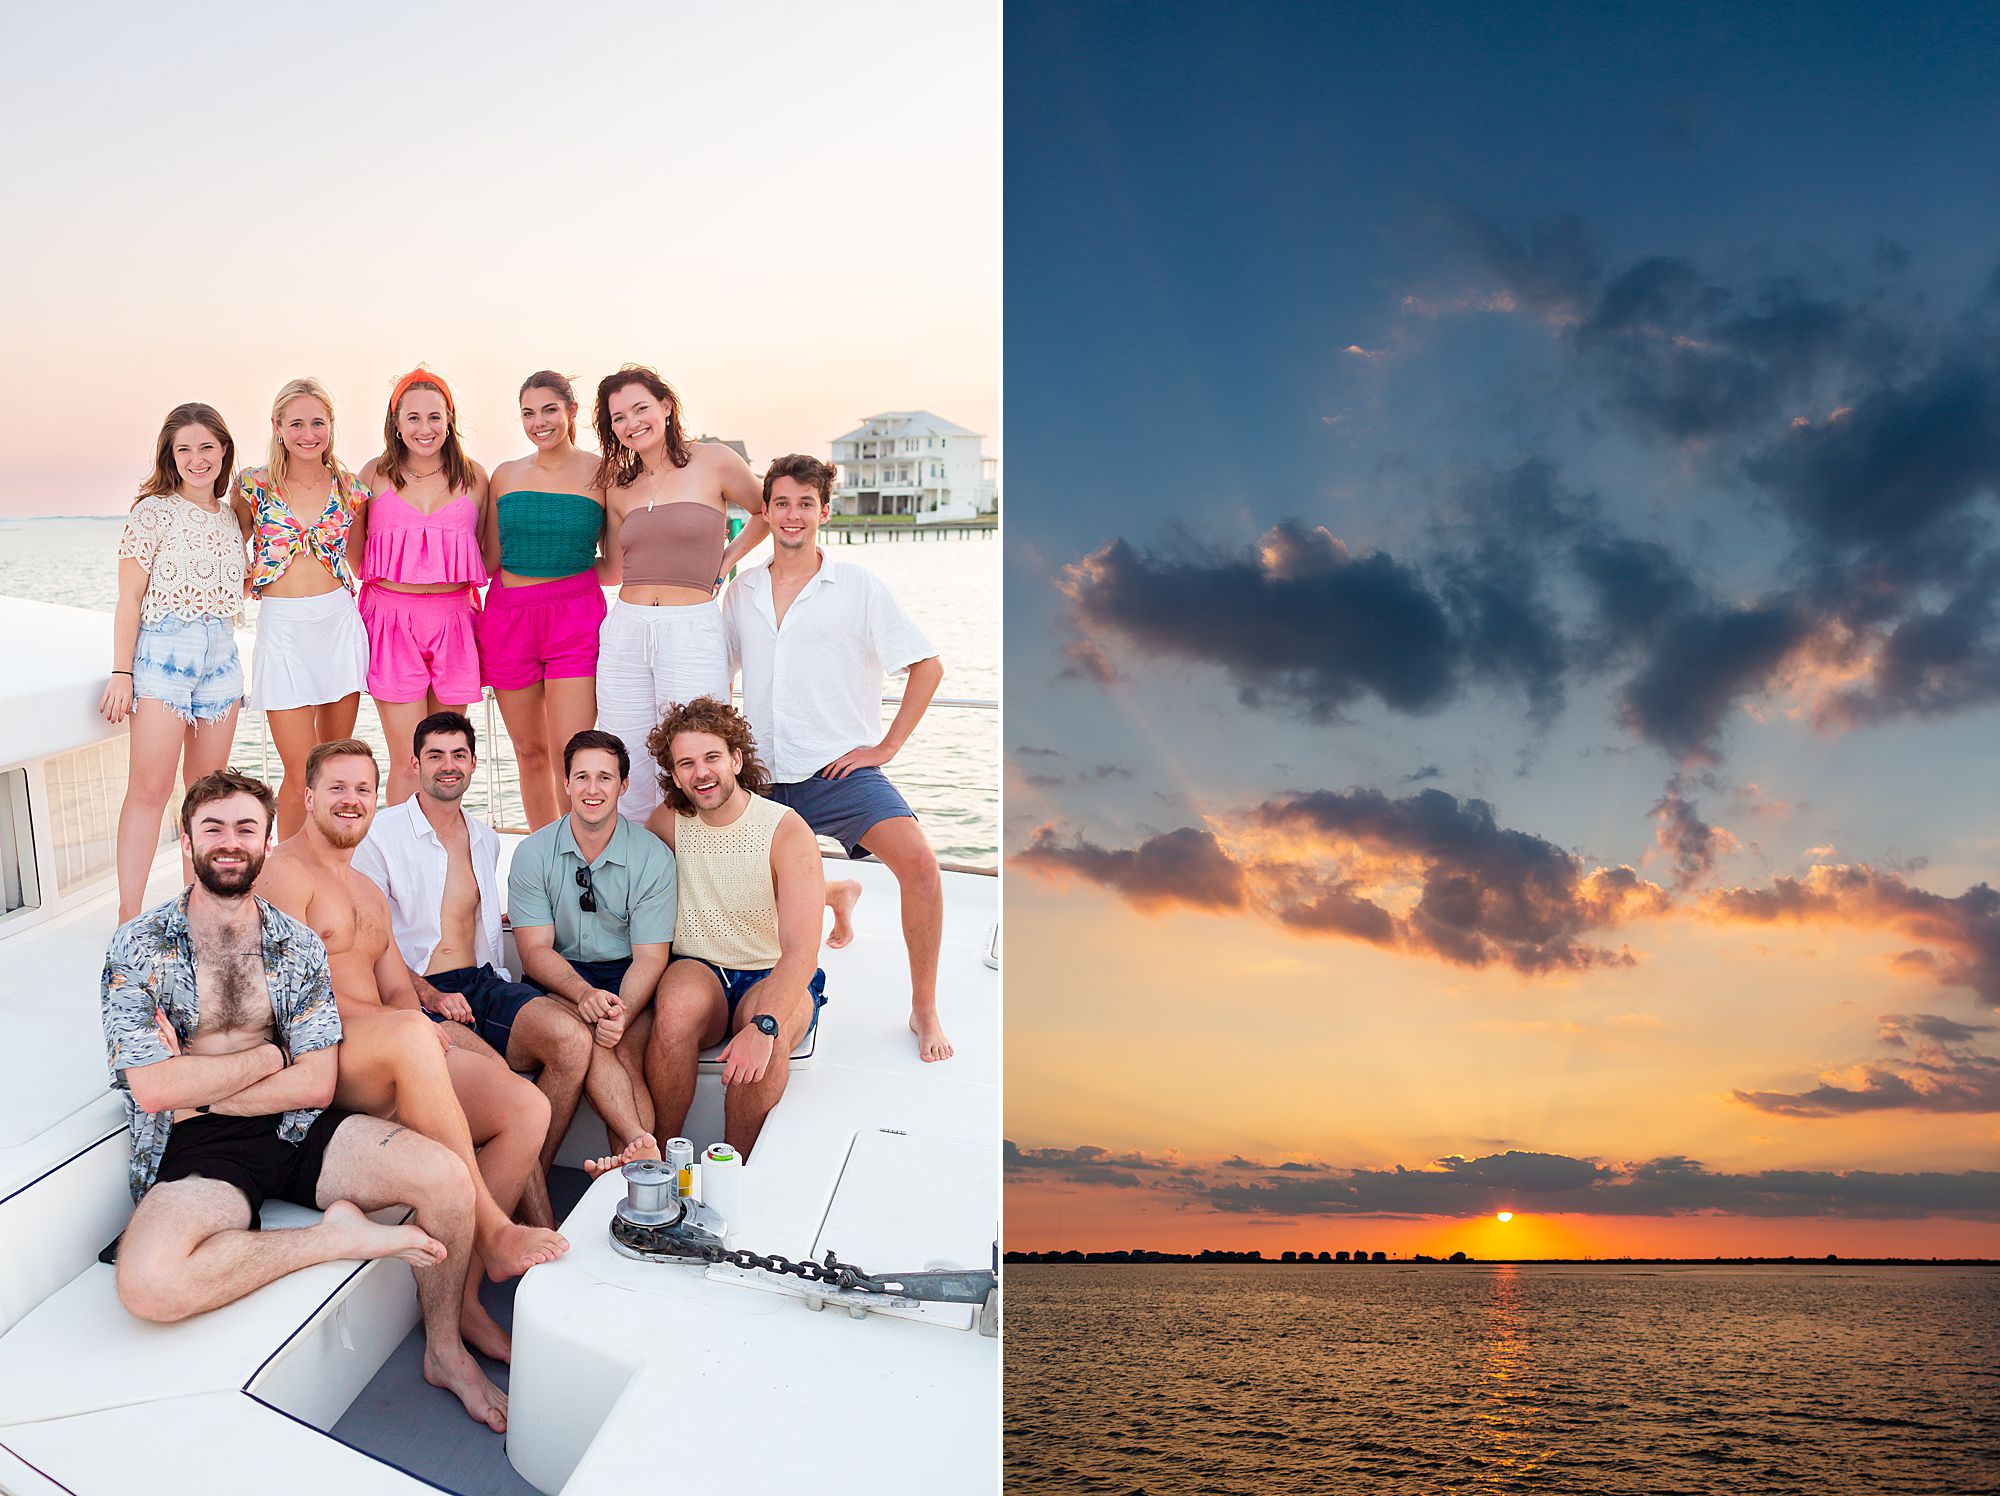 A group of friends enjoys sunset together at a Galveston yacht birthday party; sunset over Galveston Island West Bay.